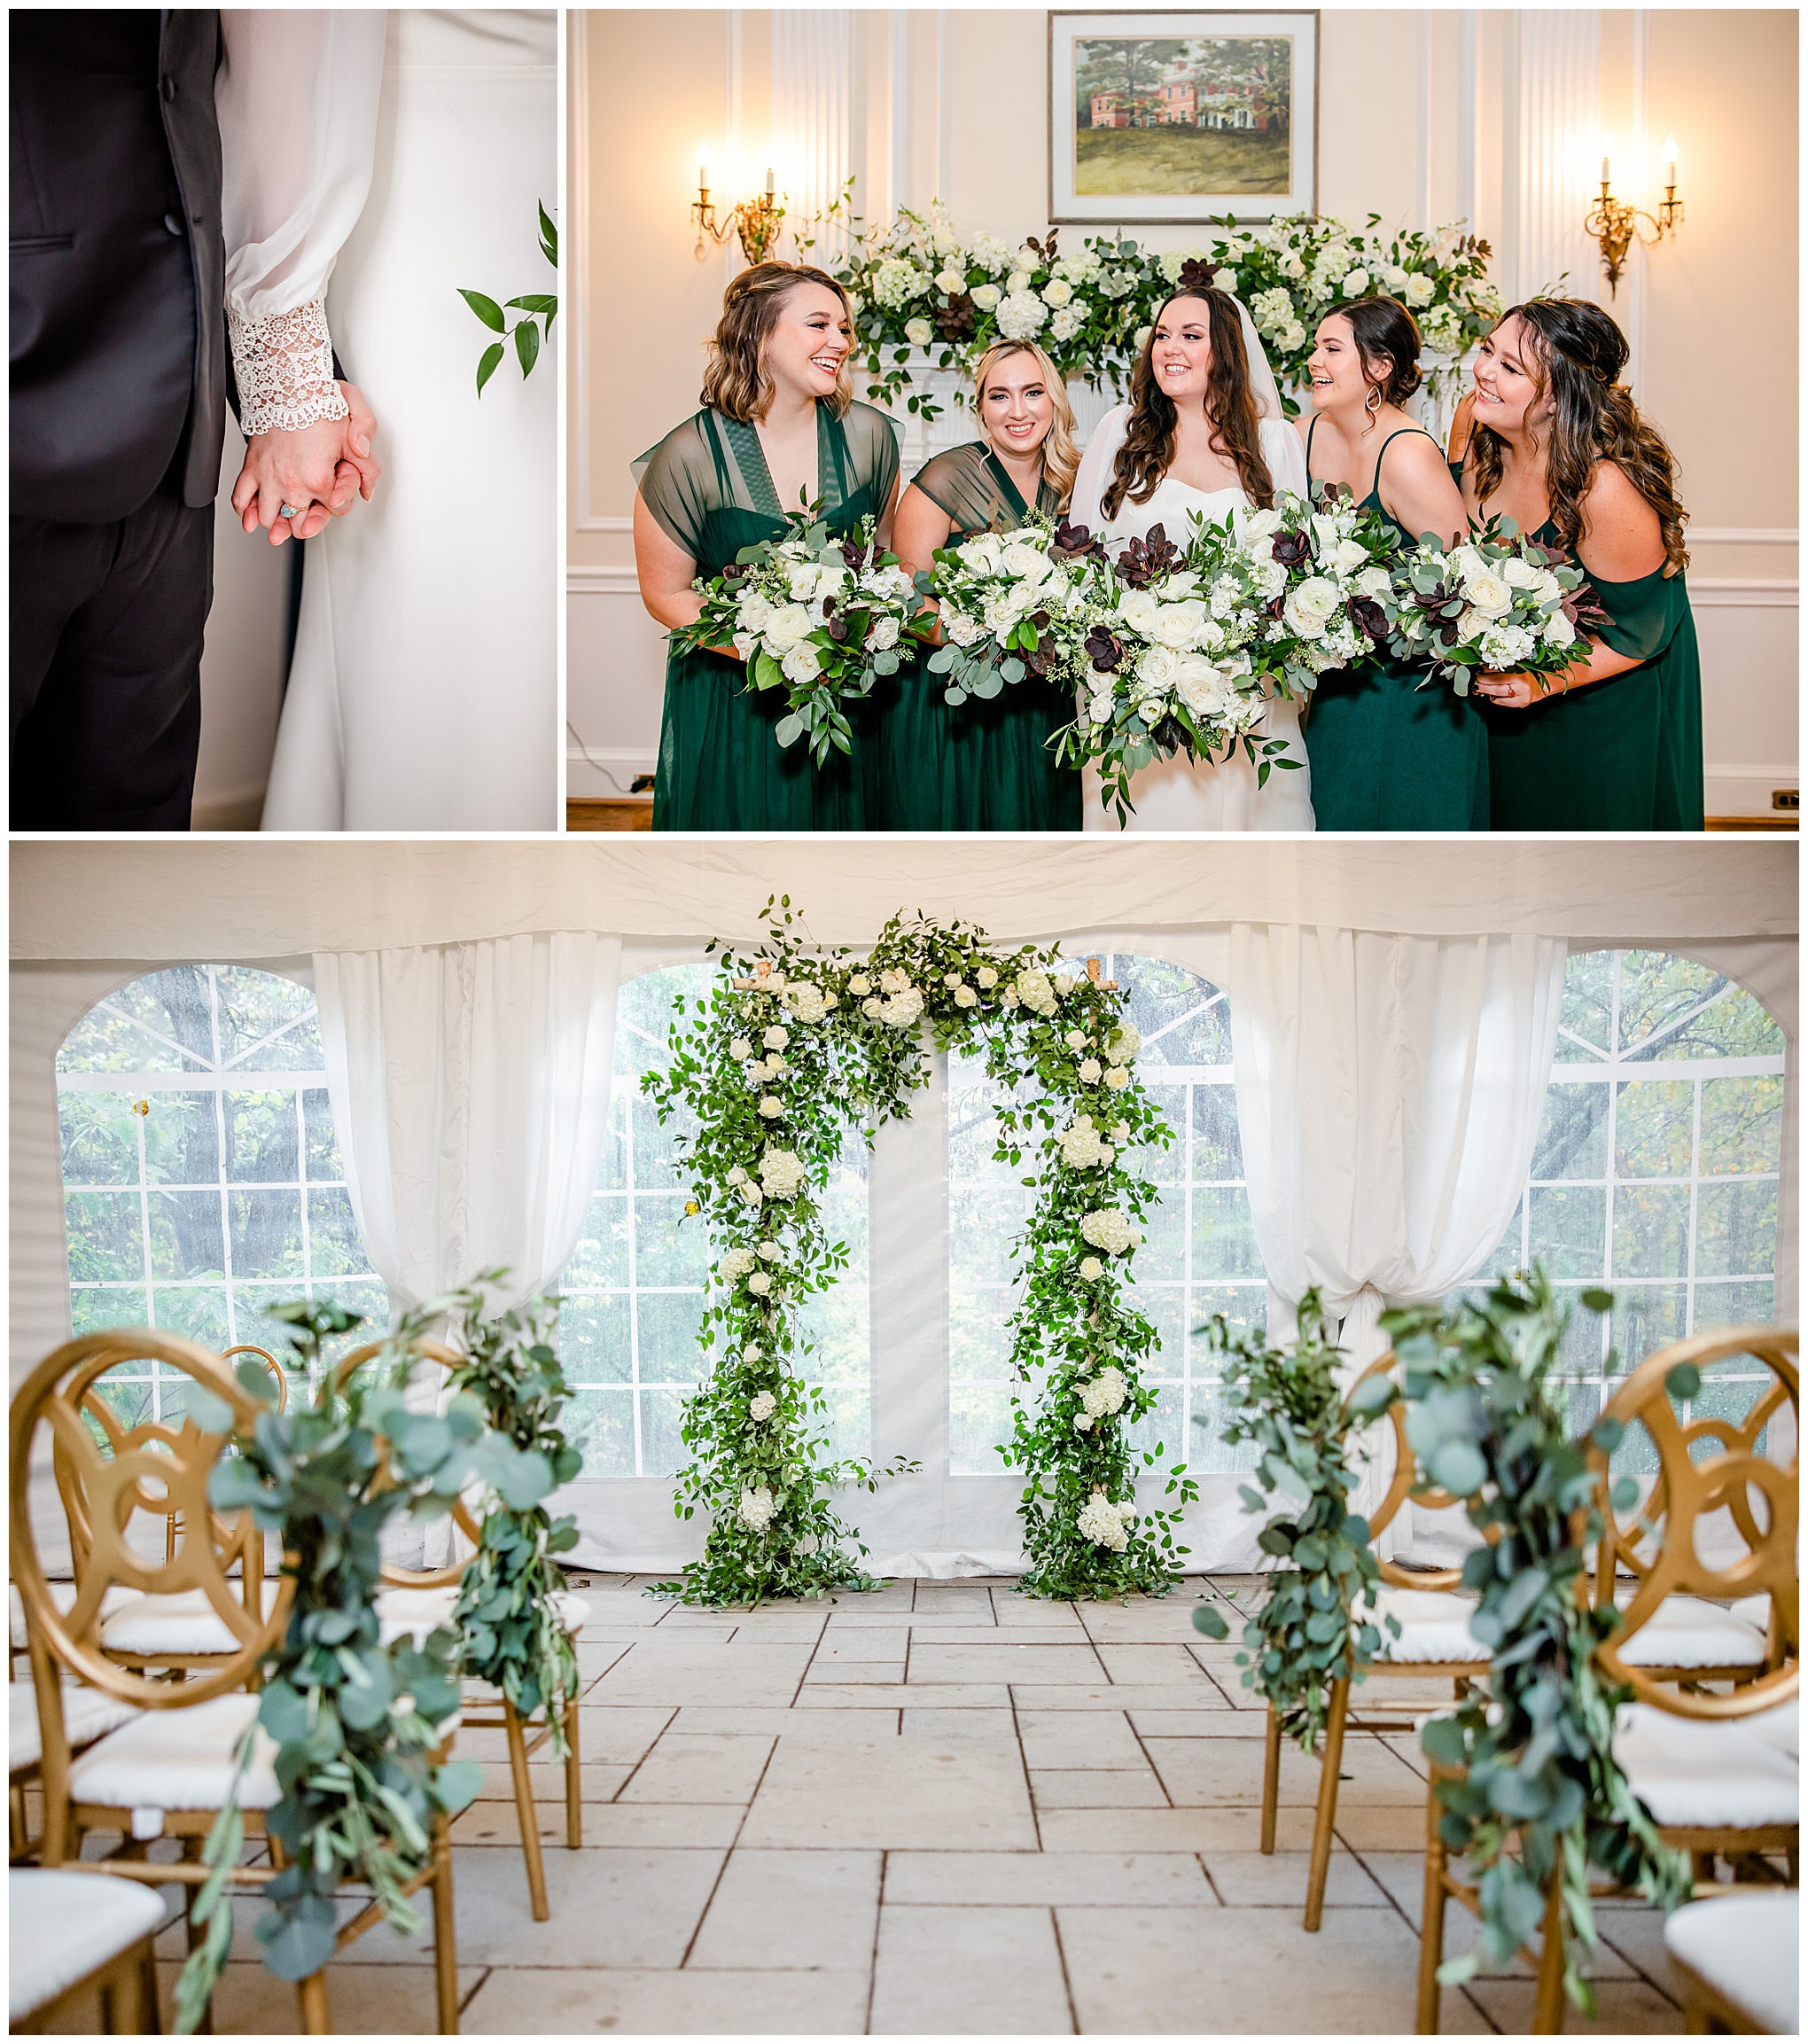 emerald and ivory Woodend Sanctuary wedding, autumn Woodend Sanctuary wedding, rainy day wedding, Maryland wedding venues, Chevy Chase MD wedding venue, mansion wedding, manor house wedding, indoor wedding, DC wedding venue, DC wedding photographer, Baltimore wedding photographer, Rachel E.H. Photography, emerald and ivory aesthetic, bride with bridesmaids, flower arch alter, Flowers at 38, bride and groom holding hands